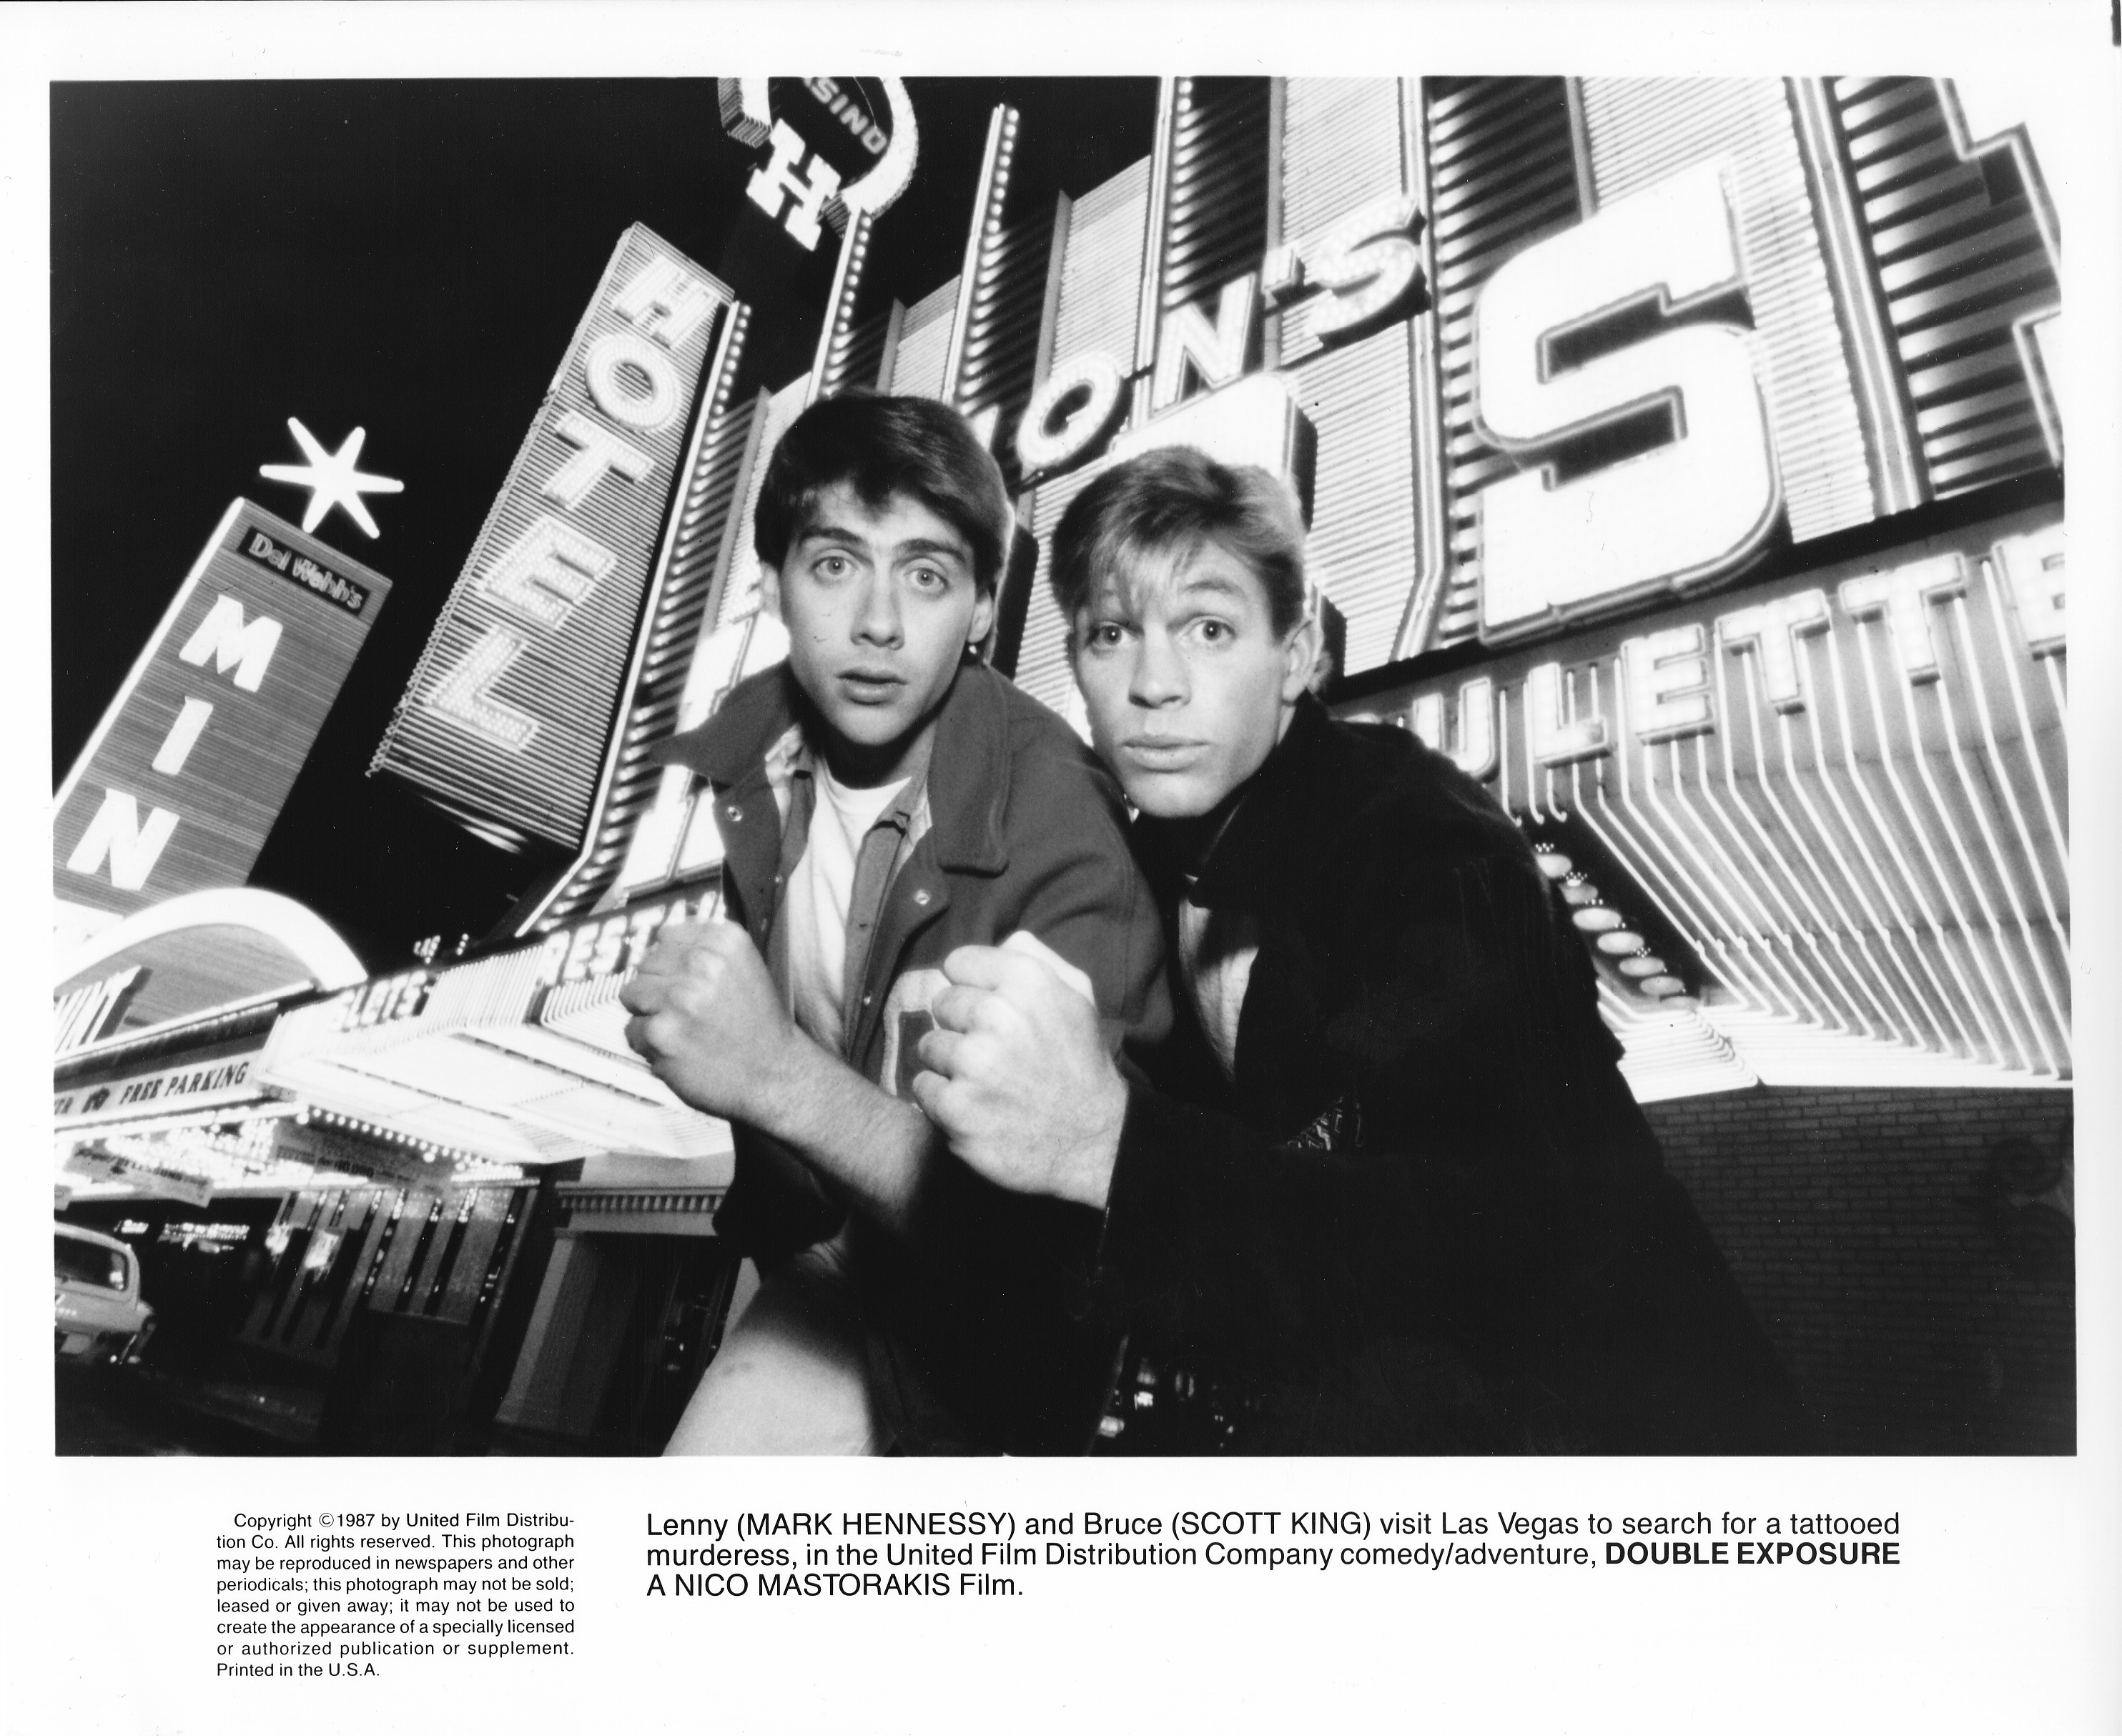 Promotional photo, shot in Las Vegas, for the movie Terminal Exposure. Mark Hennessy (L) and Scott King (R).